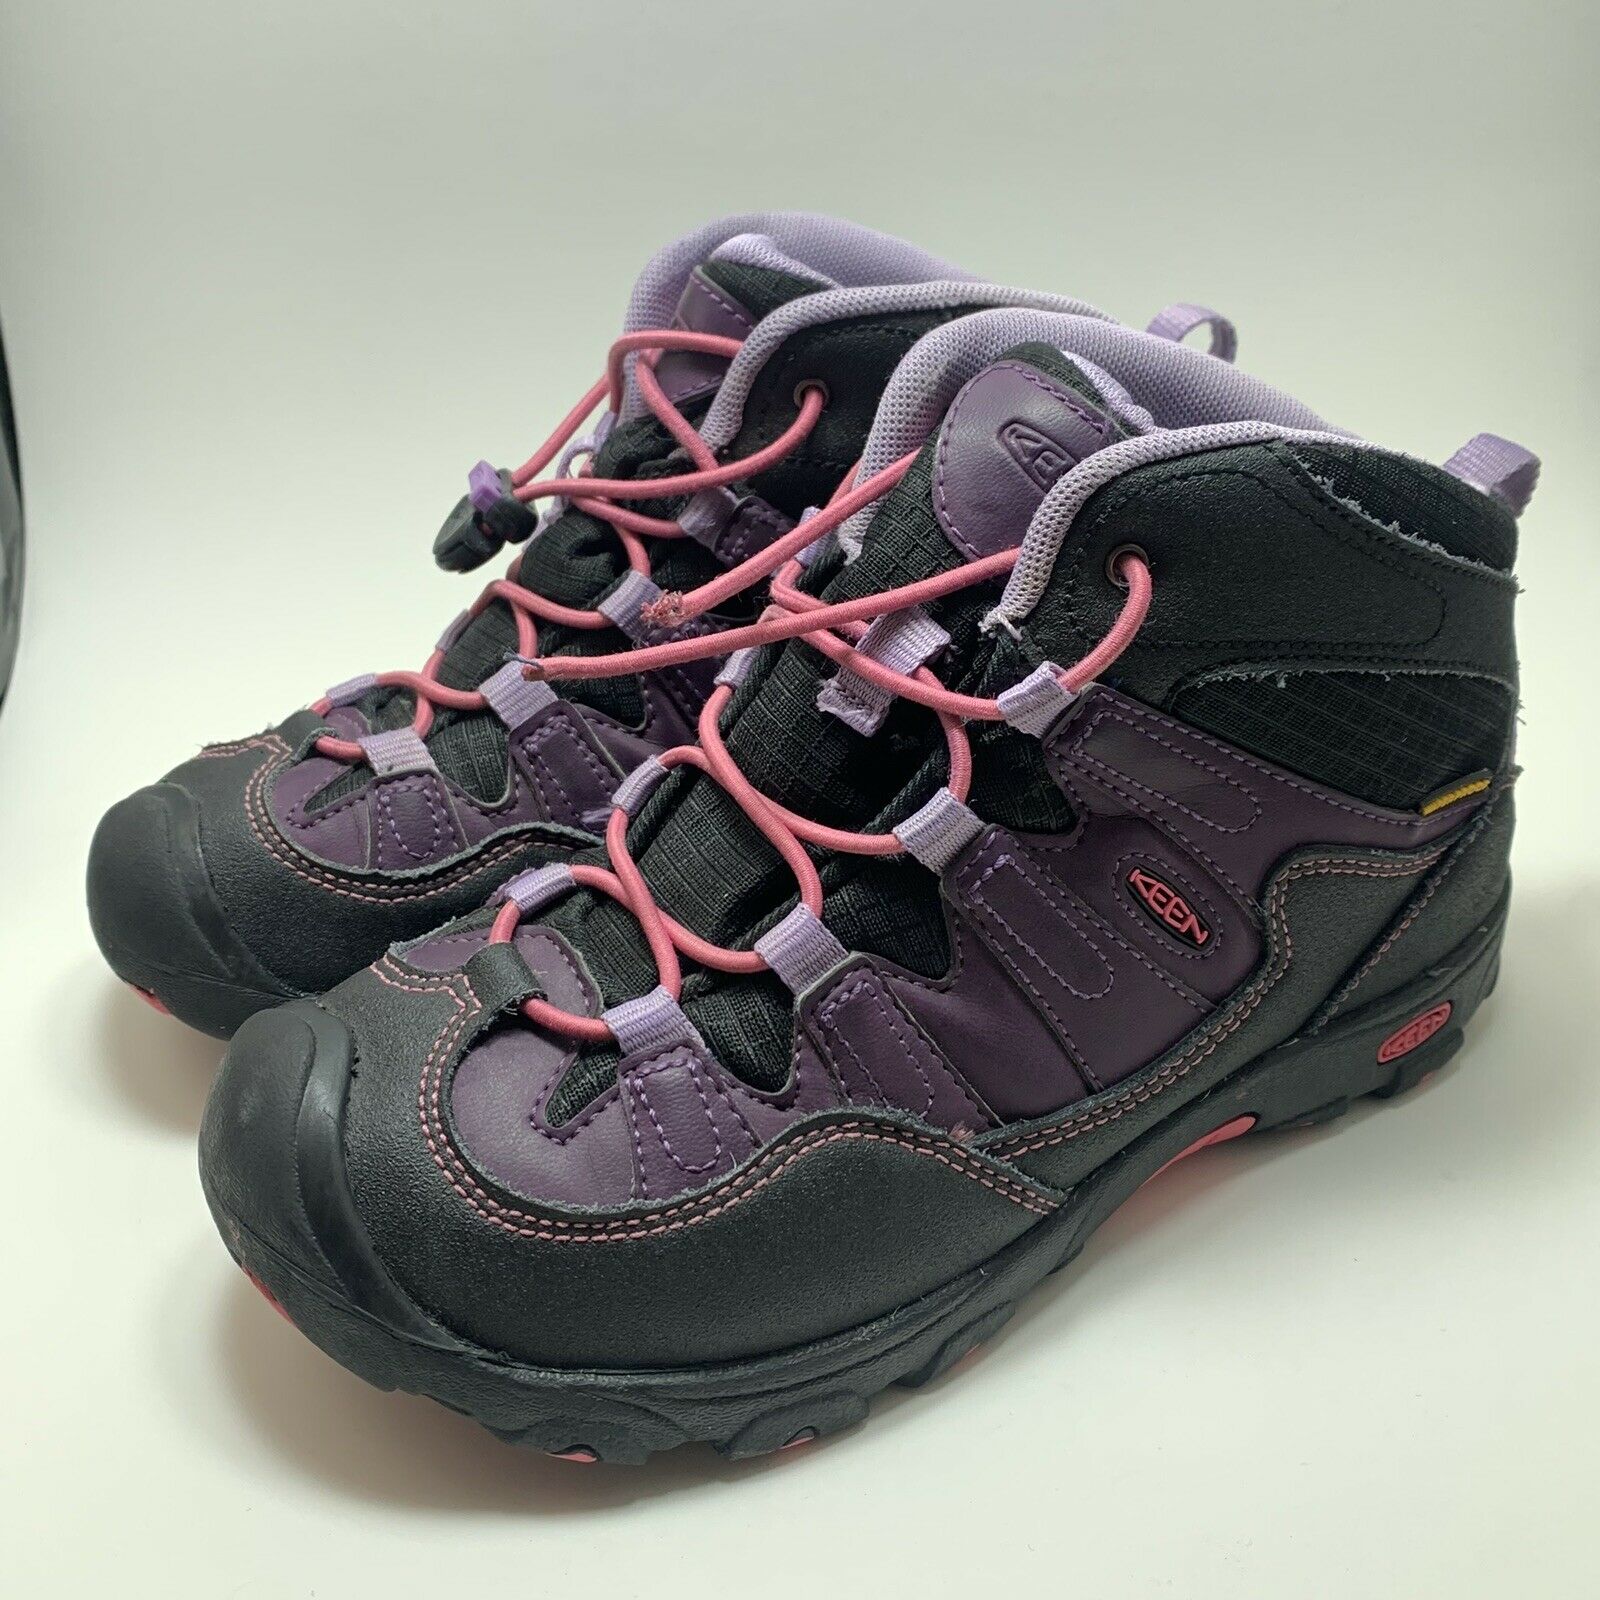 Keen Mid Waterproof Hiking Boots Purple Pink Black Size 4 Great Condition!